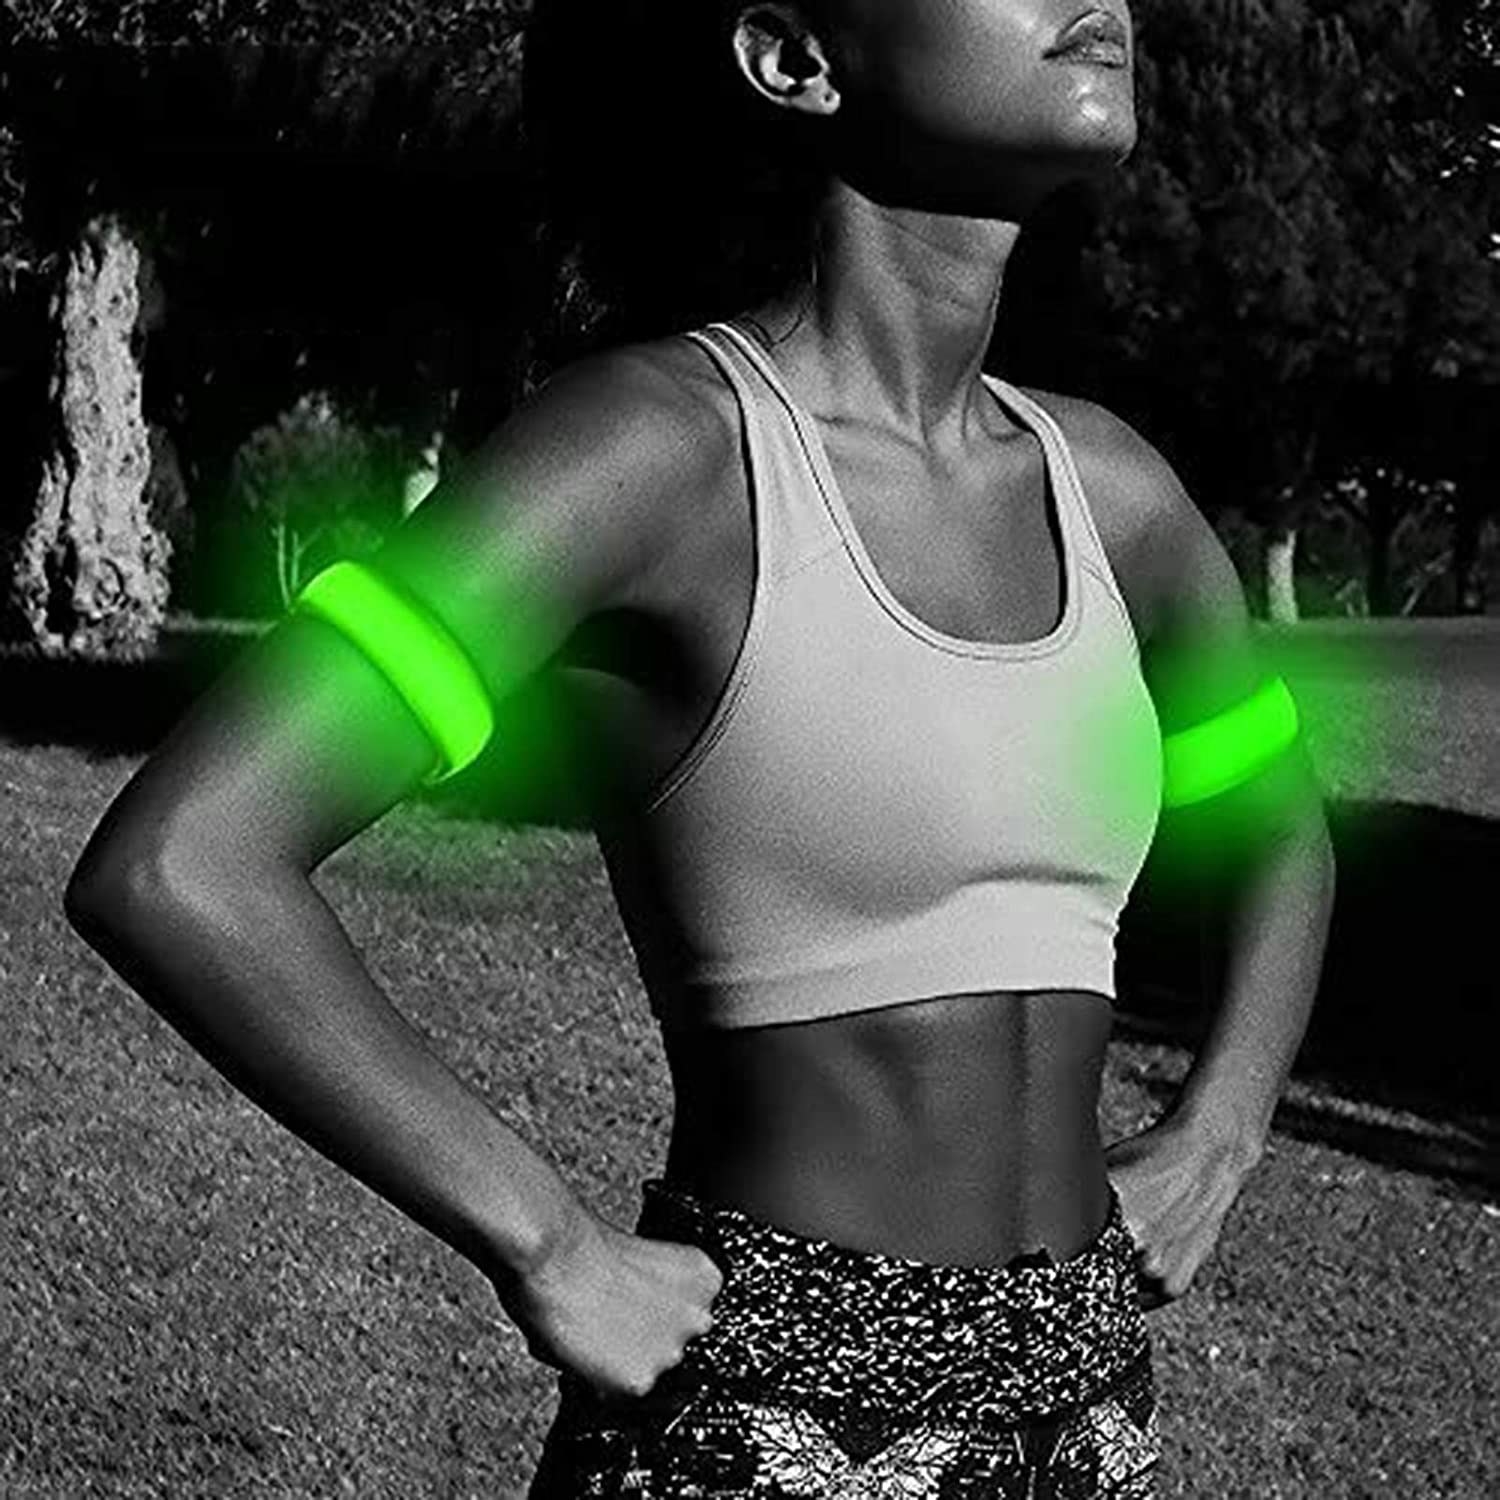 model running at nighttime with green LED arm bands on their arms